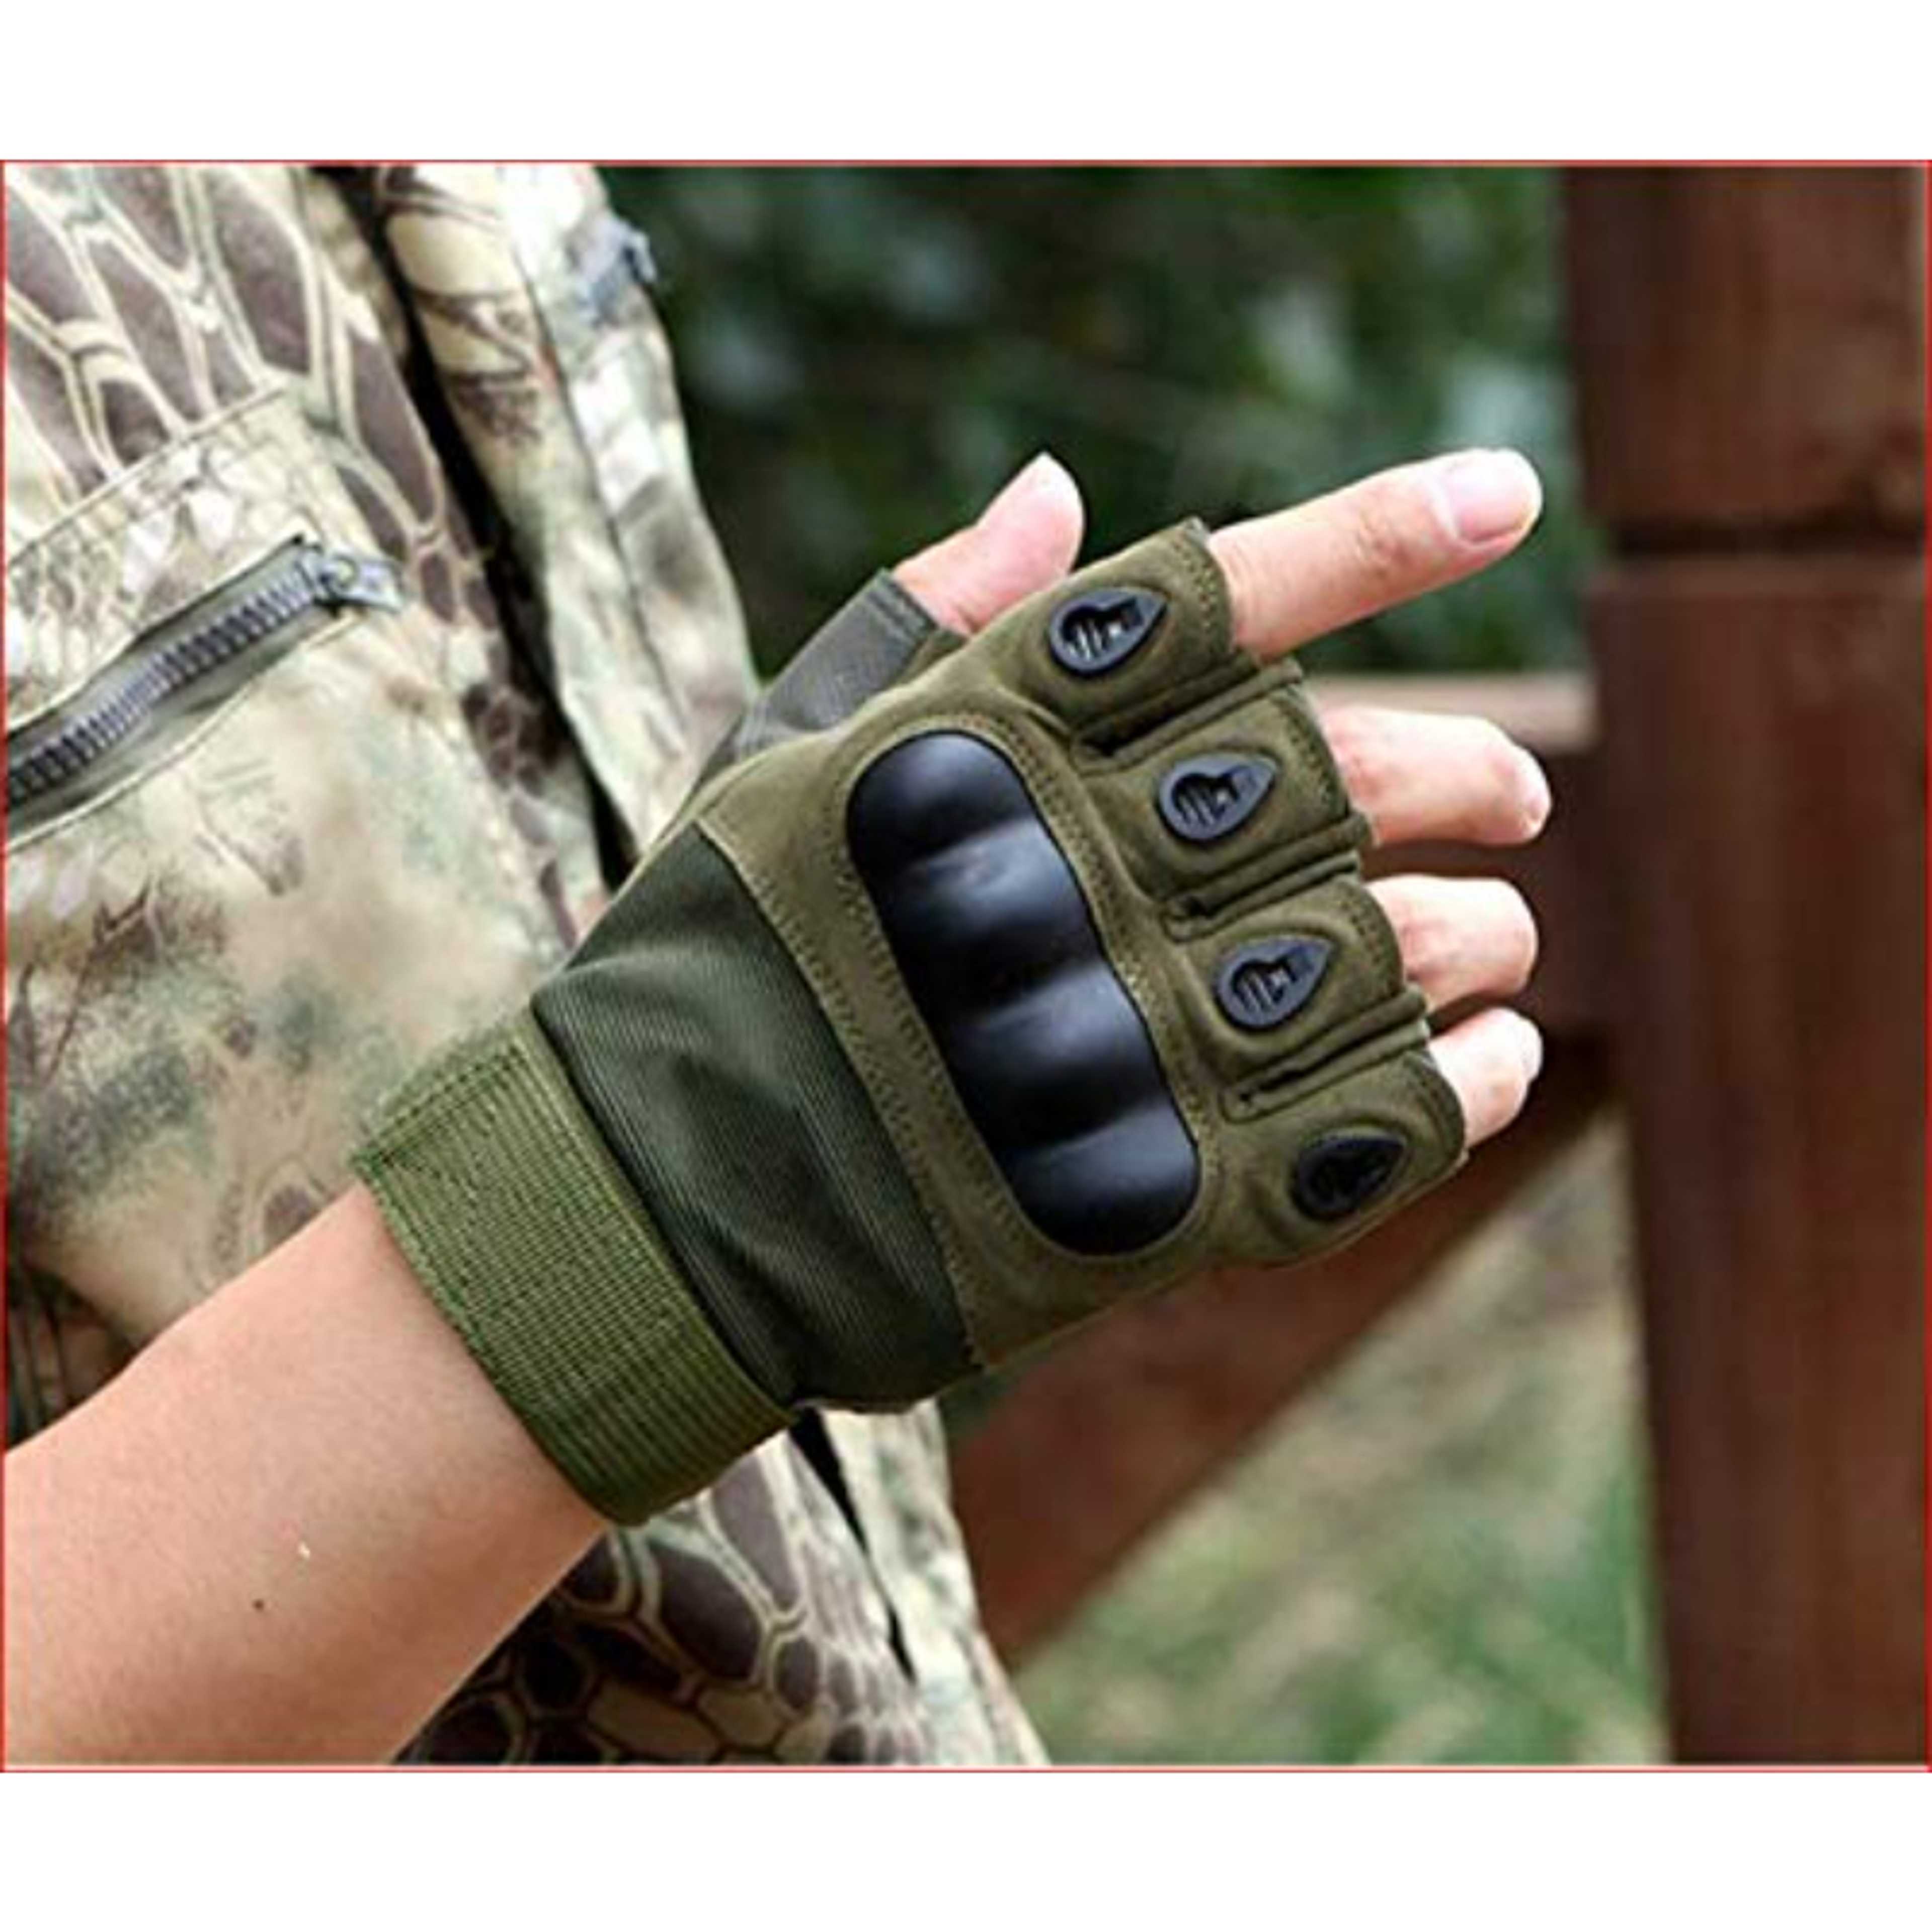 Half Finger Gloves for Sports,Hiking,Cyclling,Travelling,Camping,Outdoor